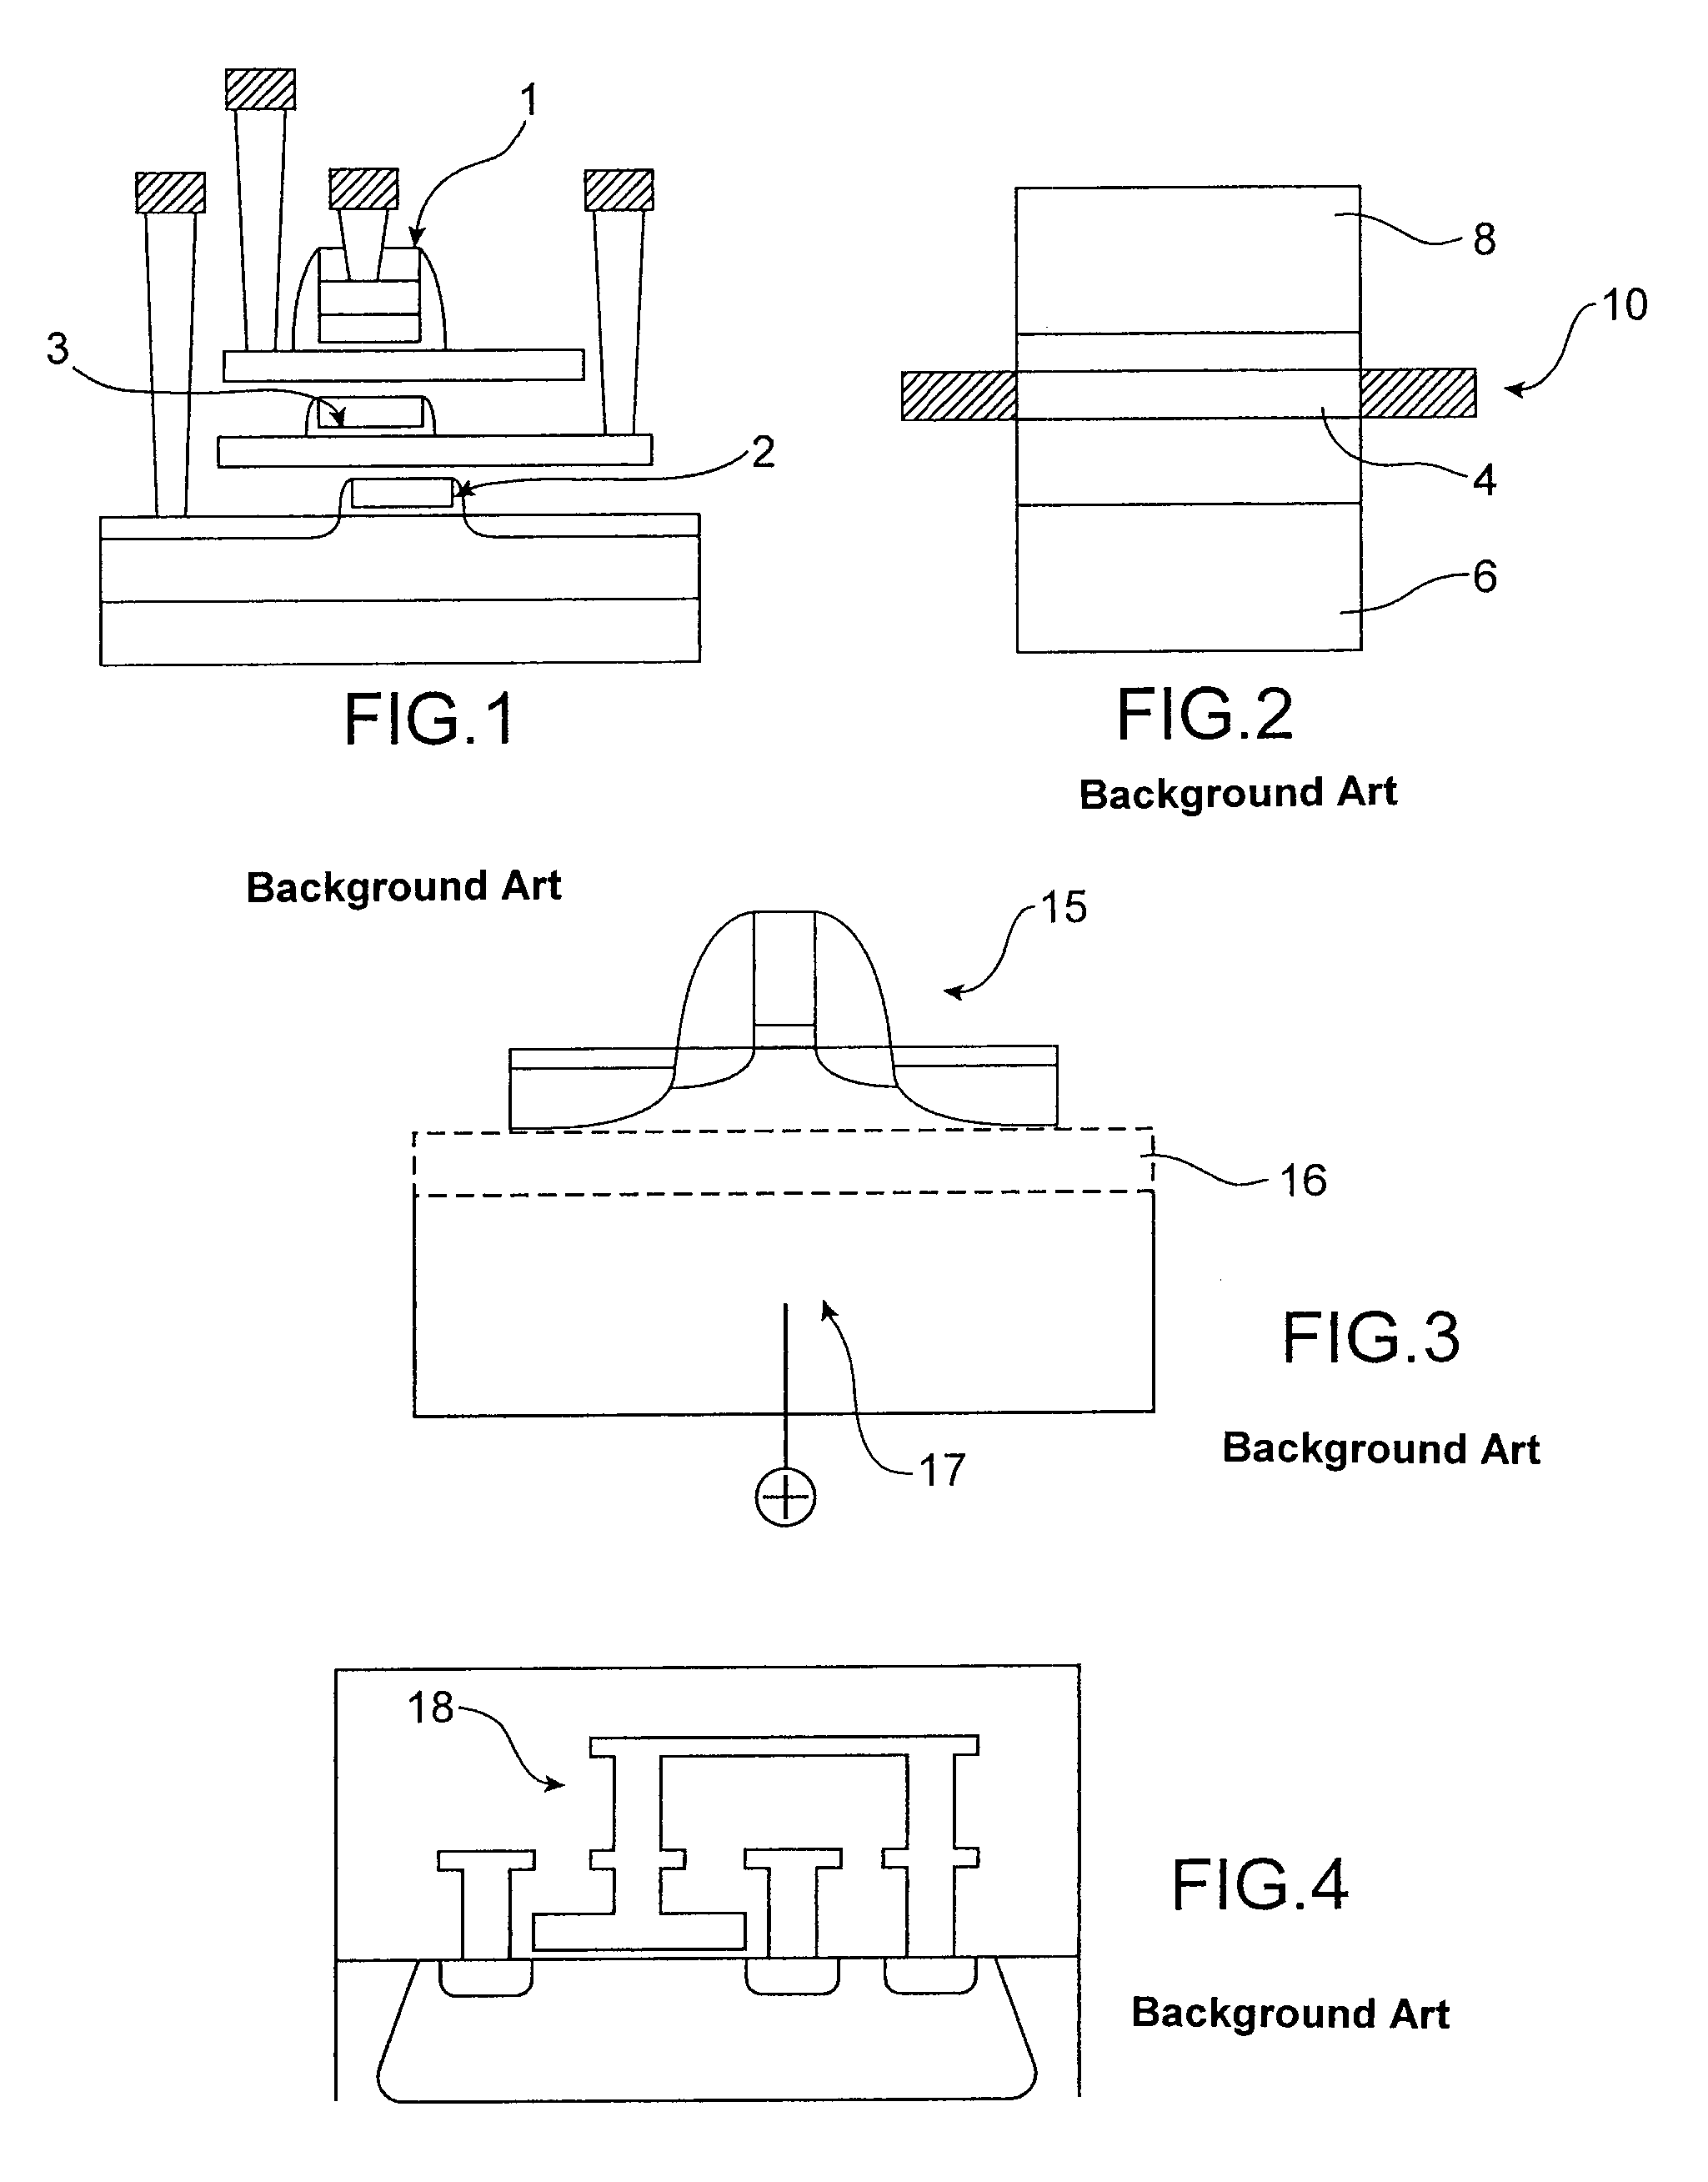 Circuit with transistors integrated in three dimensions and having a dynamically adjustable threshold voltage VT